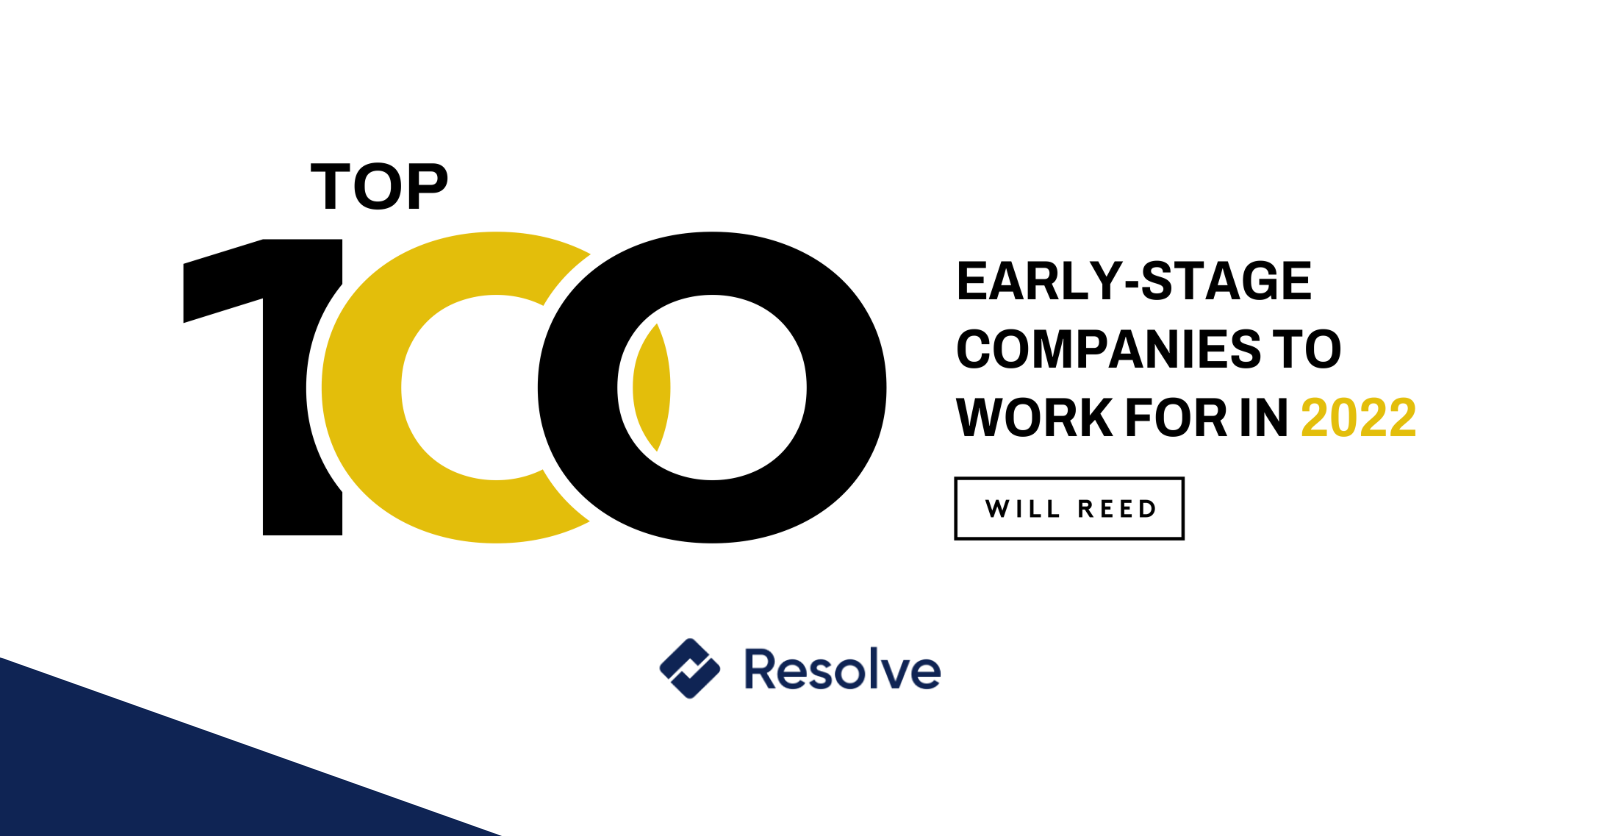 Resolve Named Top 100 Early-Stage Company to Work for in 2022